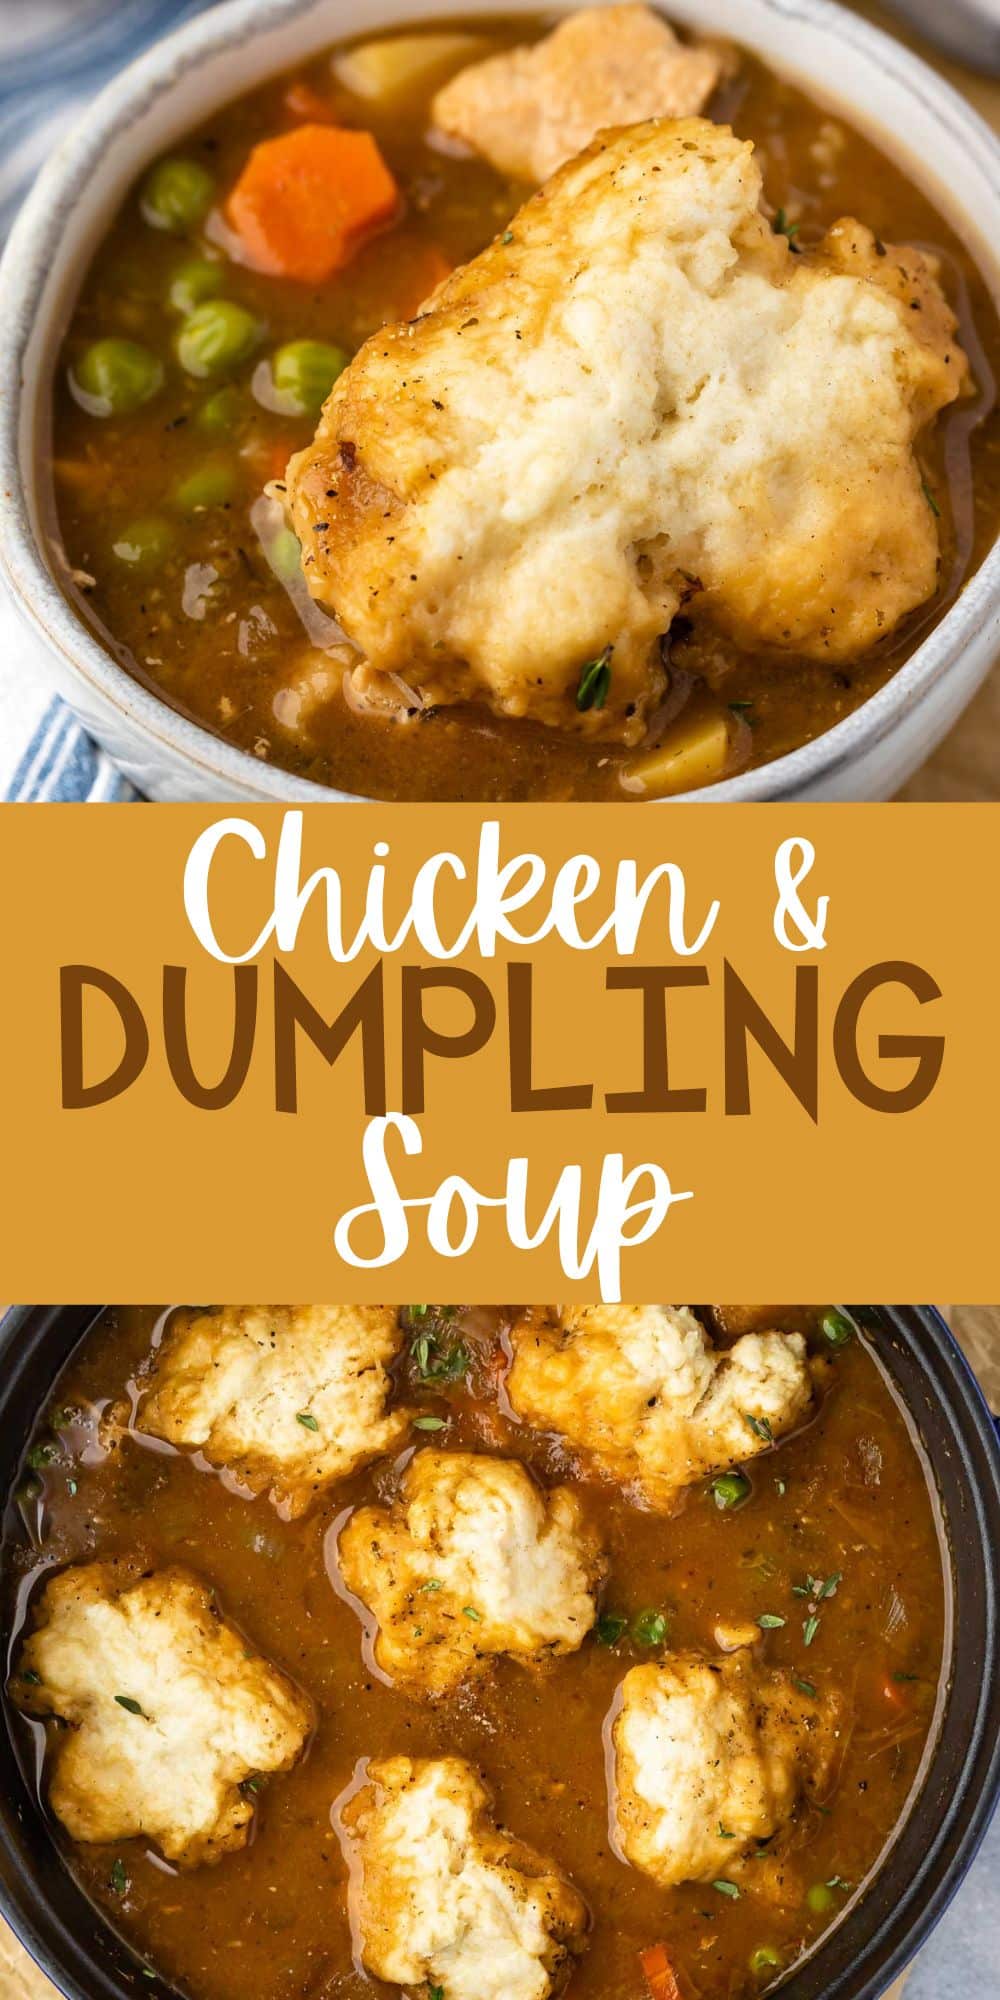 two photos of chicken and dumplings in brown soup in a white bowl with words on the image.